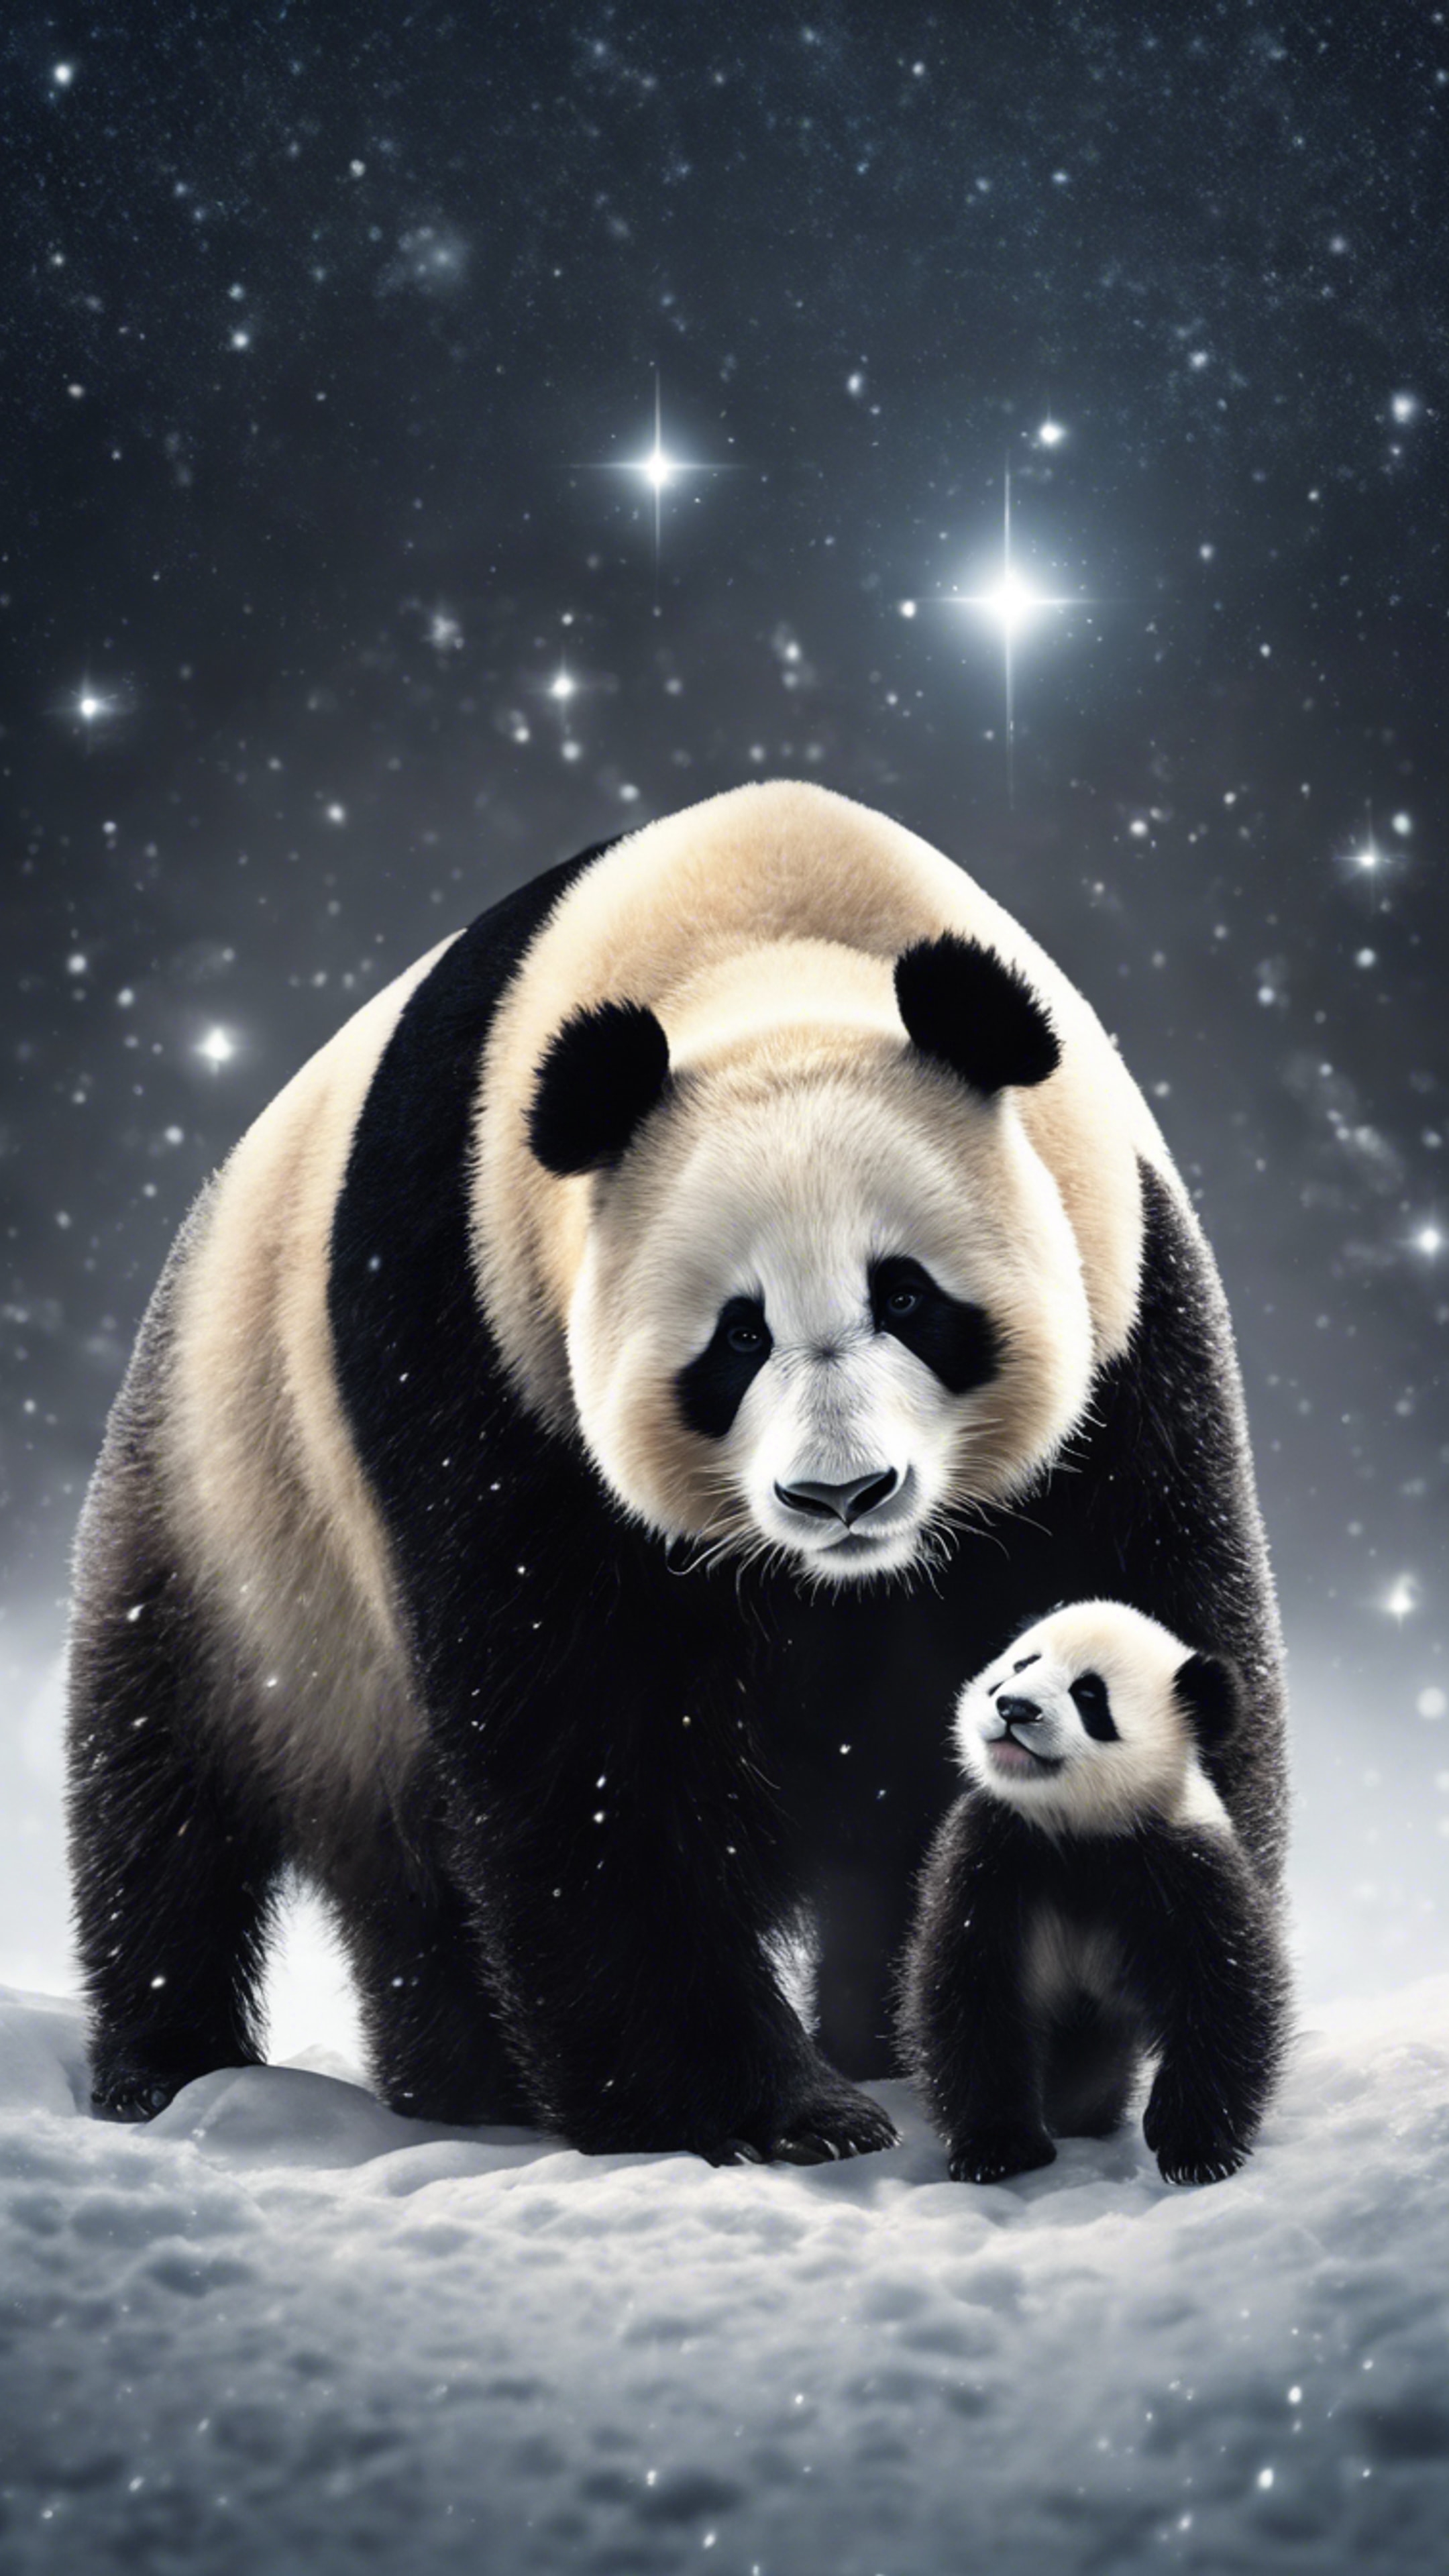 A mother panda with her cubs, peacefully taking a stroll on a silent, snowy night under a blanket of stars. Tapéta[875b5ef660eb48ddb691]